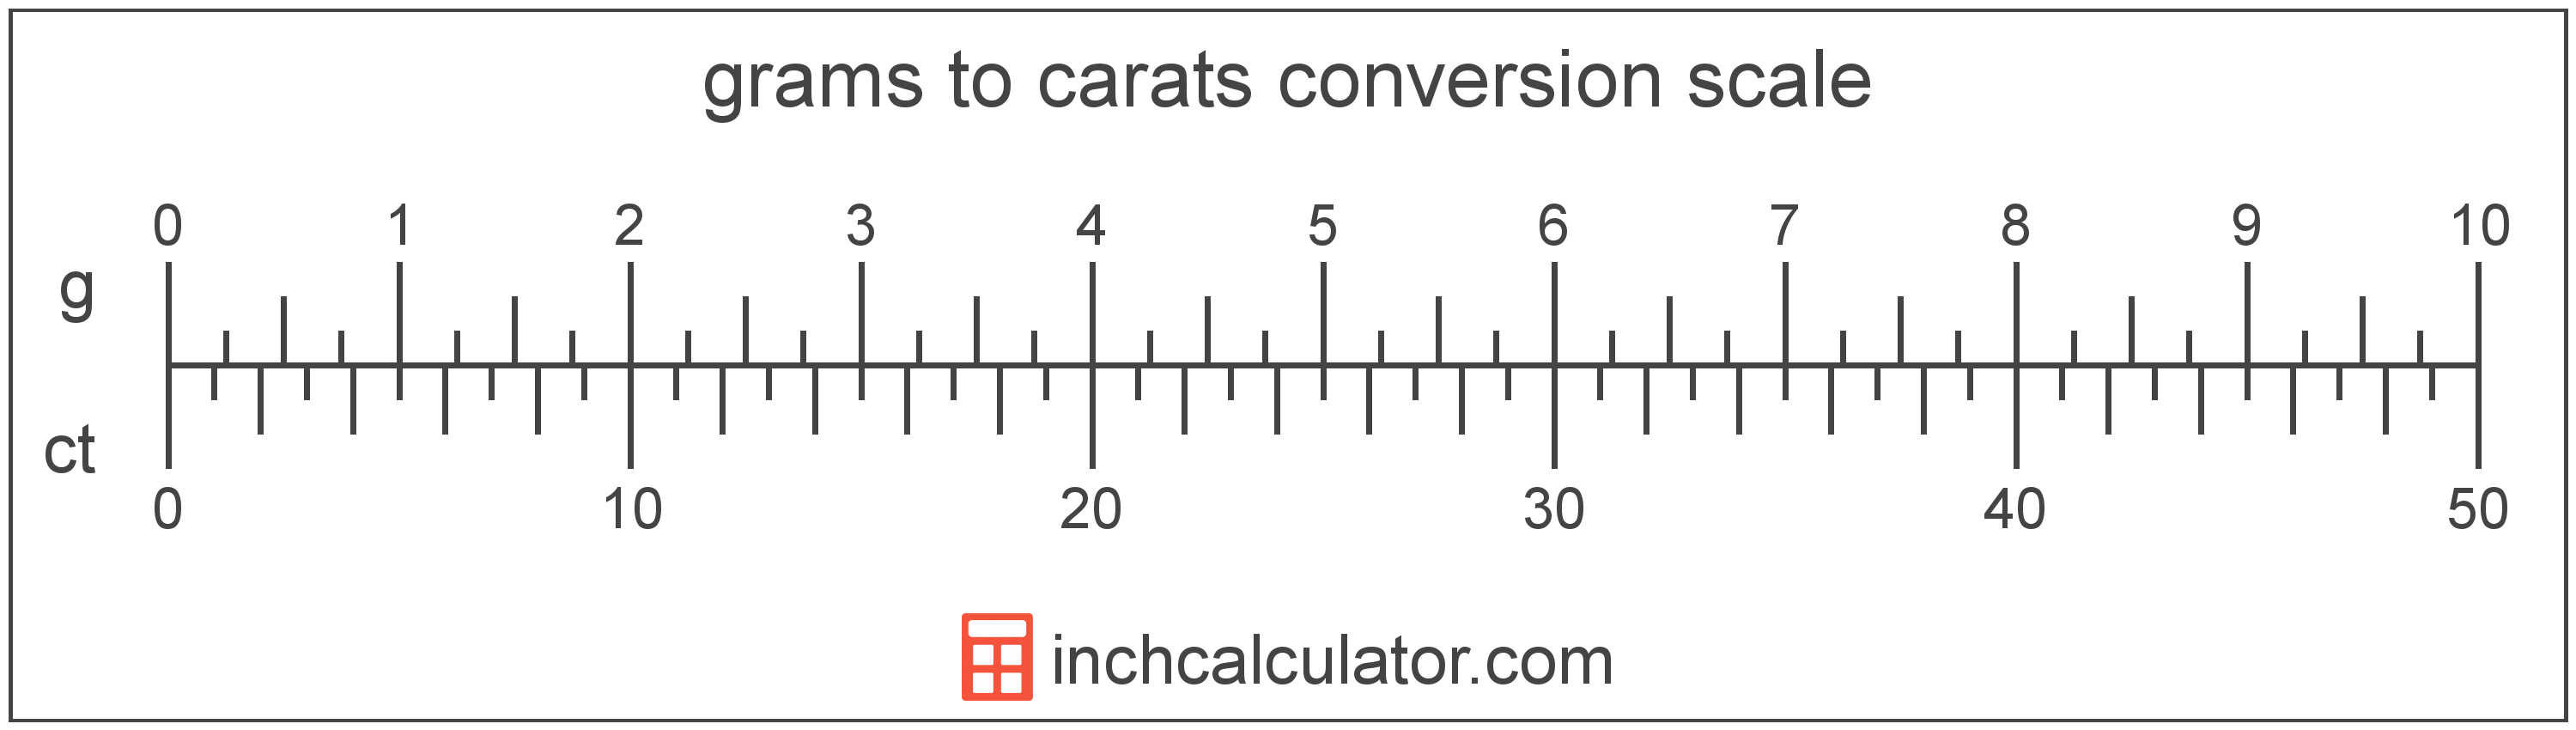 conversion scale showing carats and equivalent grams weight values